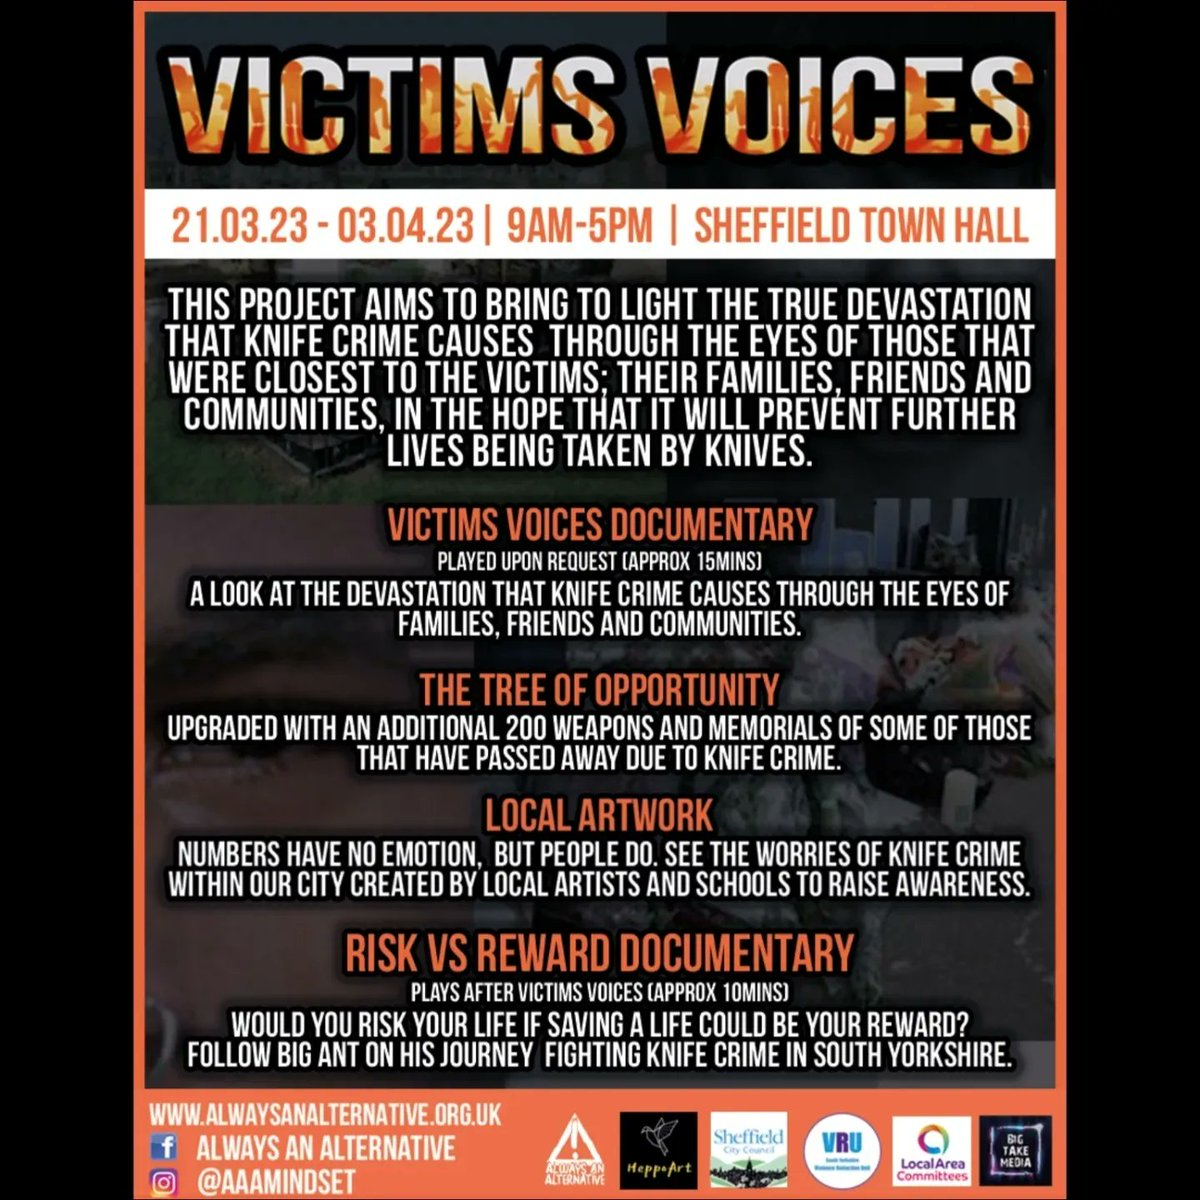 Our CEO @antzjourney  will be live on @bbcradiosheffield talking about the victim voices project around 6.10pm tonight
.
Tune in or Miss out
.
The project will be leaving on 03.04.23, it's well worth the visit.